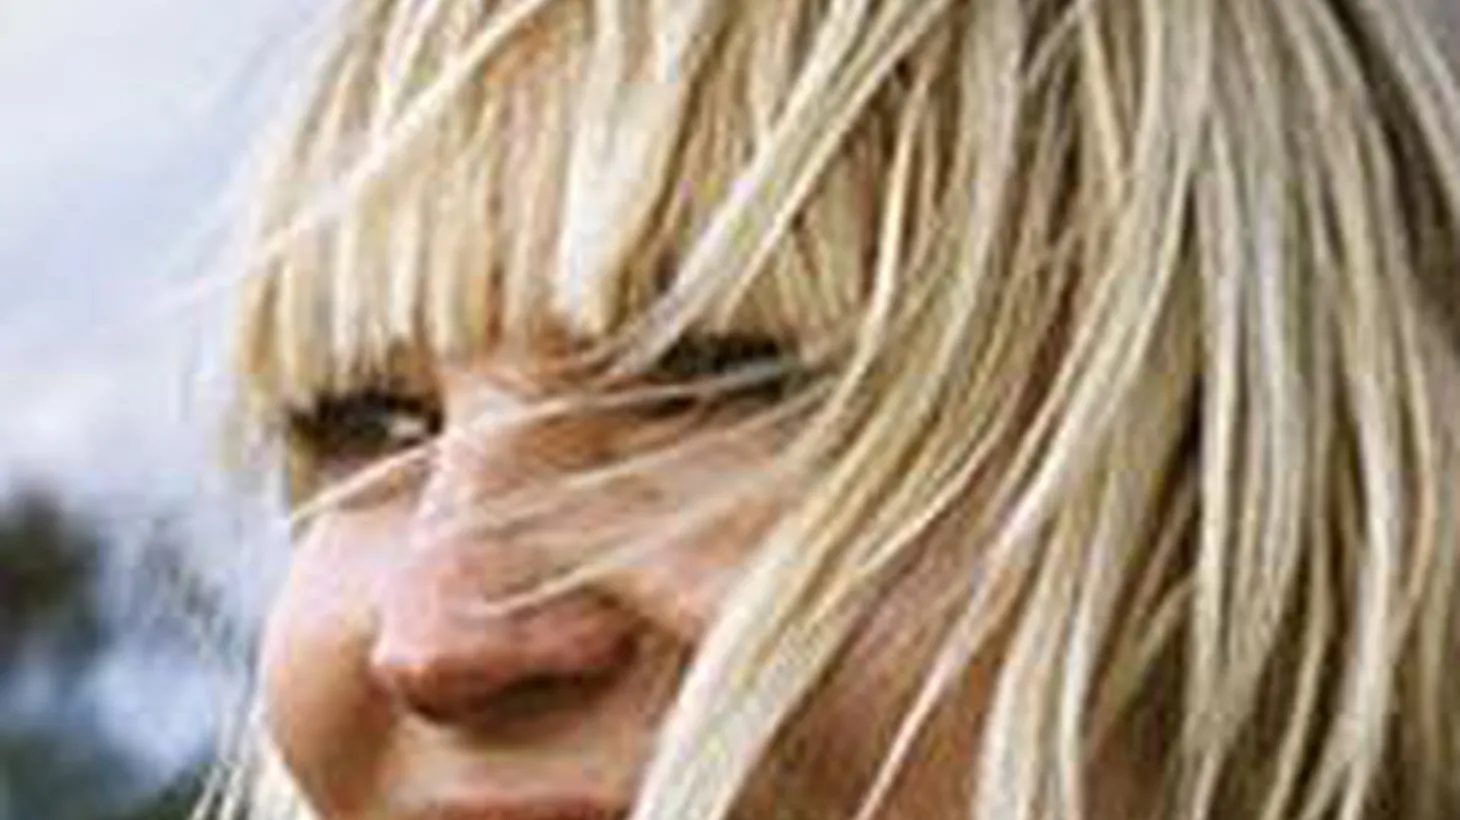 Zero 7 contributor and singer, Sia, brings her mellifluous sound to Morning Becomes Eclectic at 11:15am.